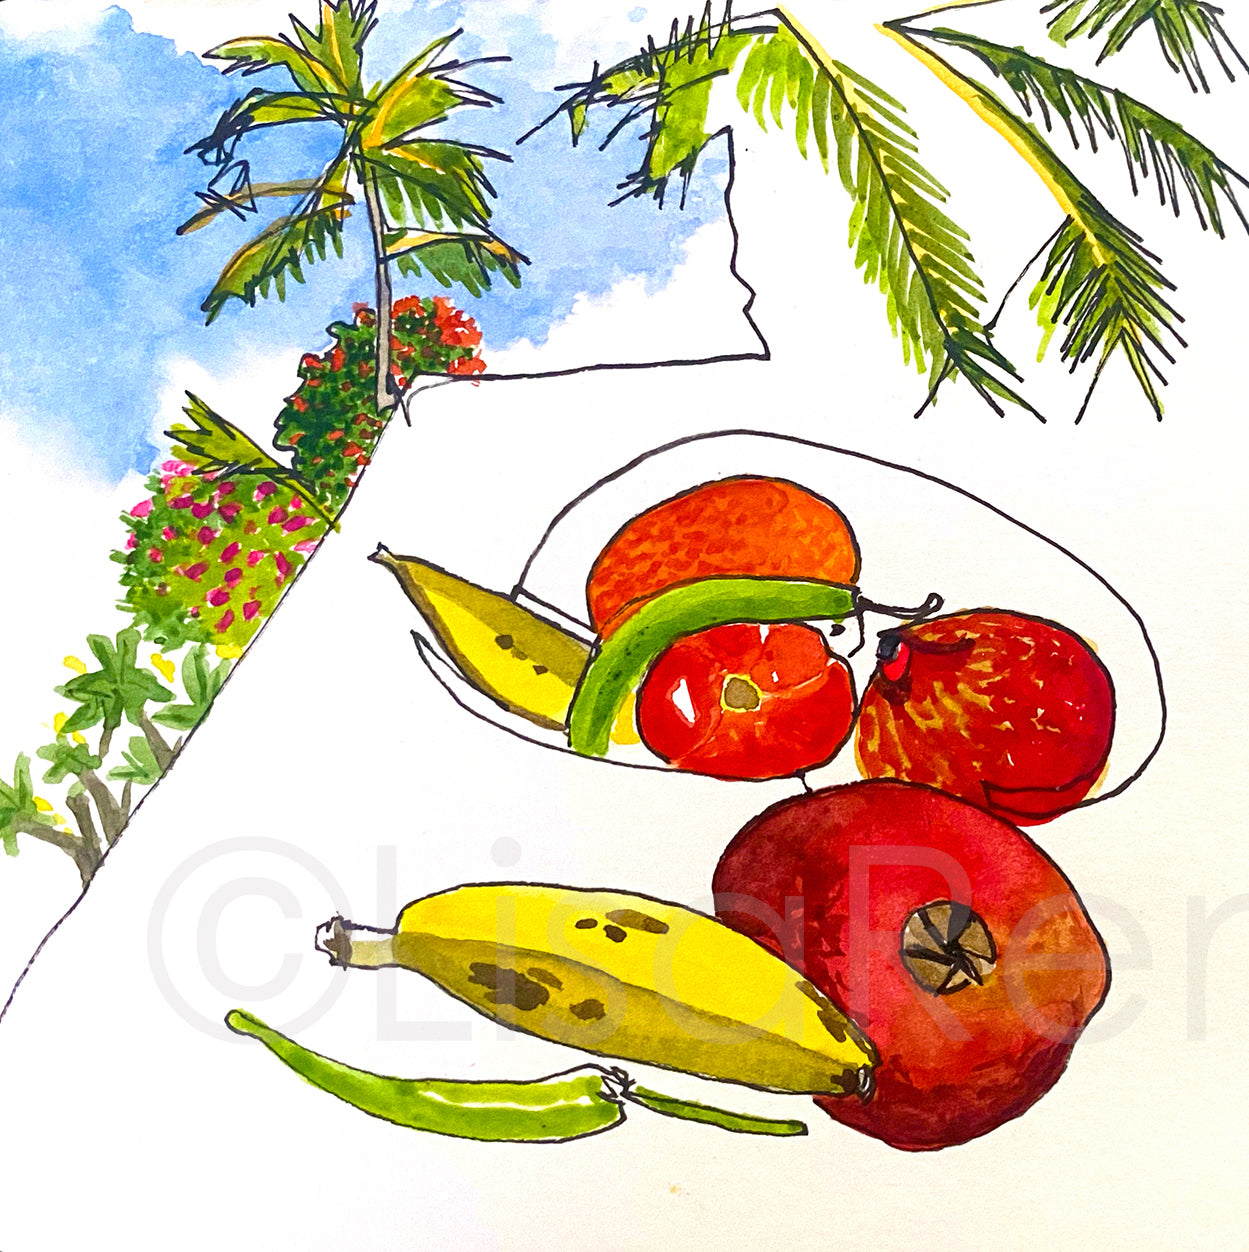 Watercolor & Ink on Paper - Still Life in India, Again